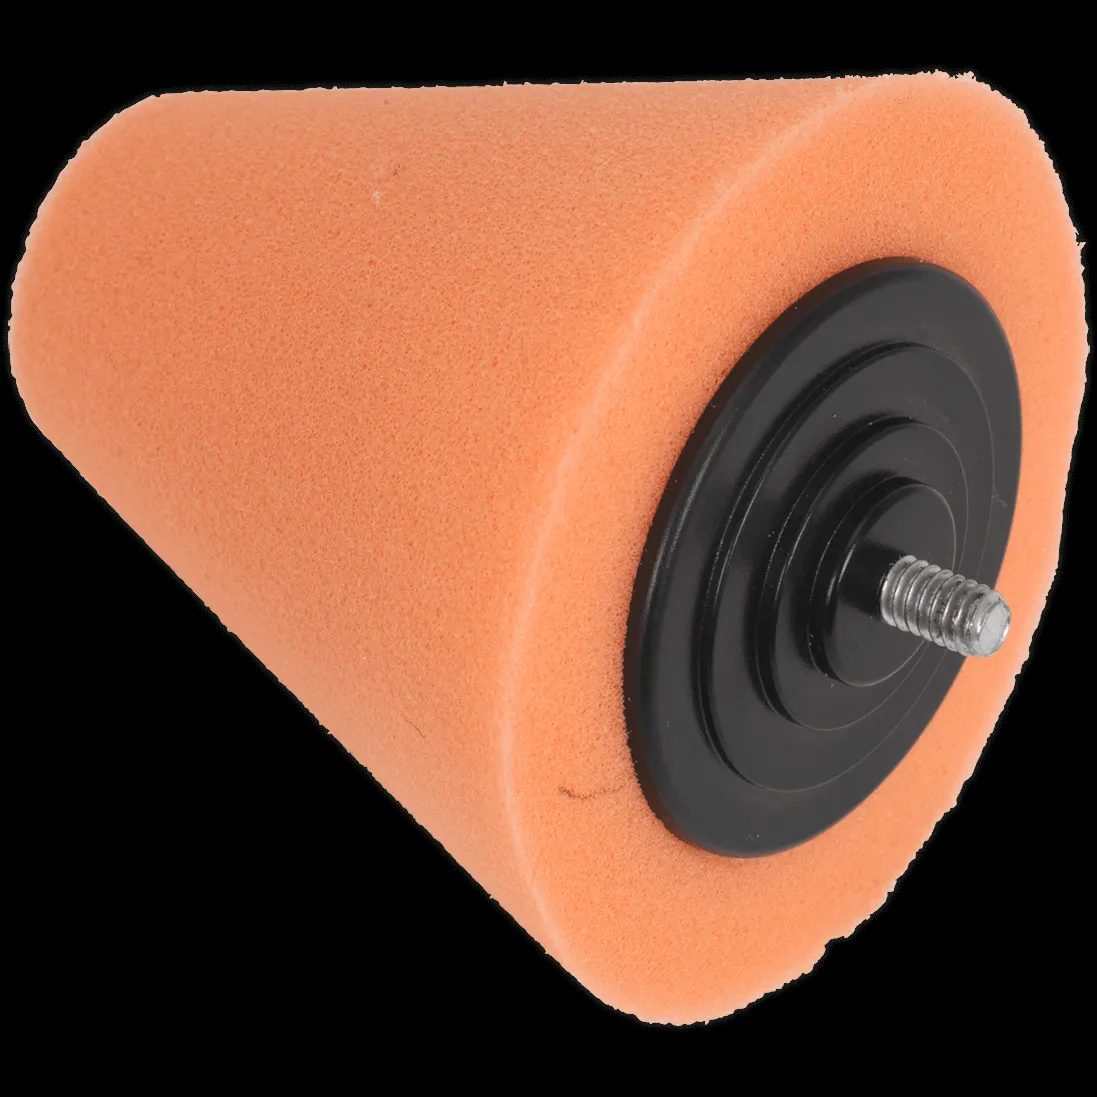 Sealey Firm Buffing and Polishing Foam Cone